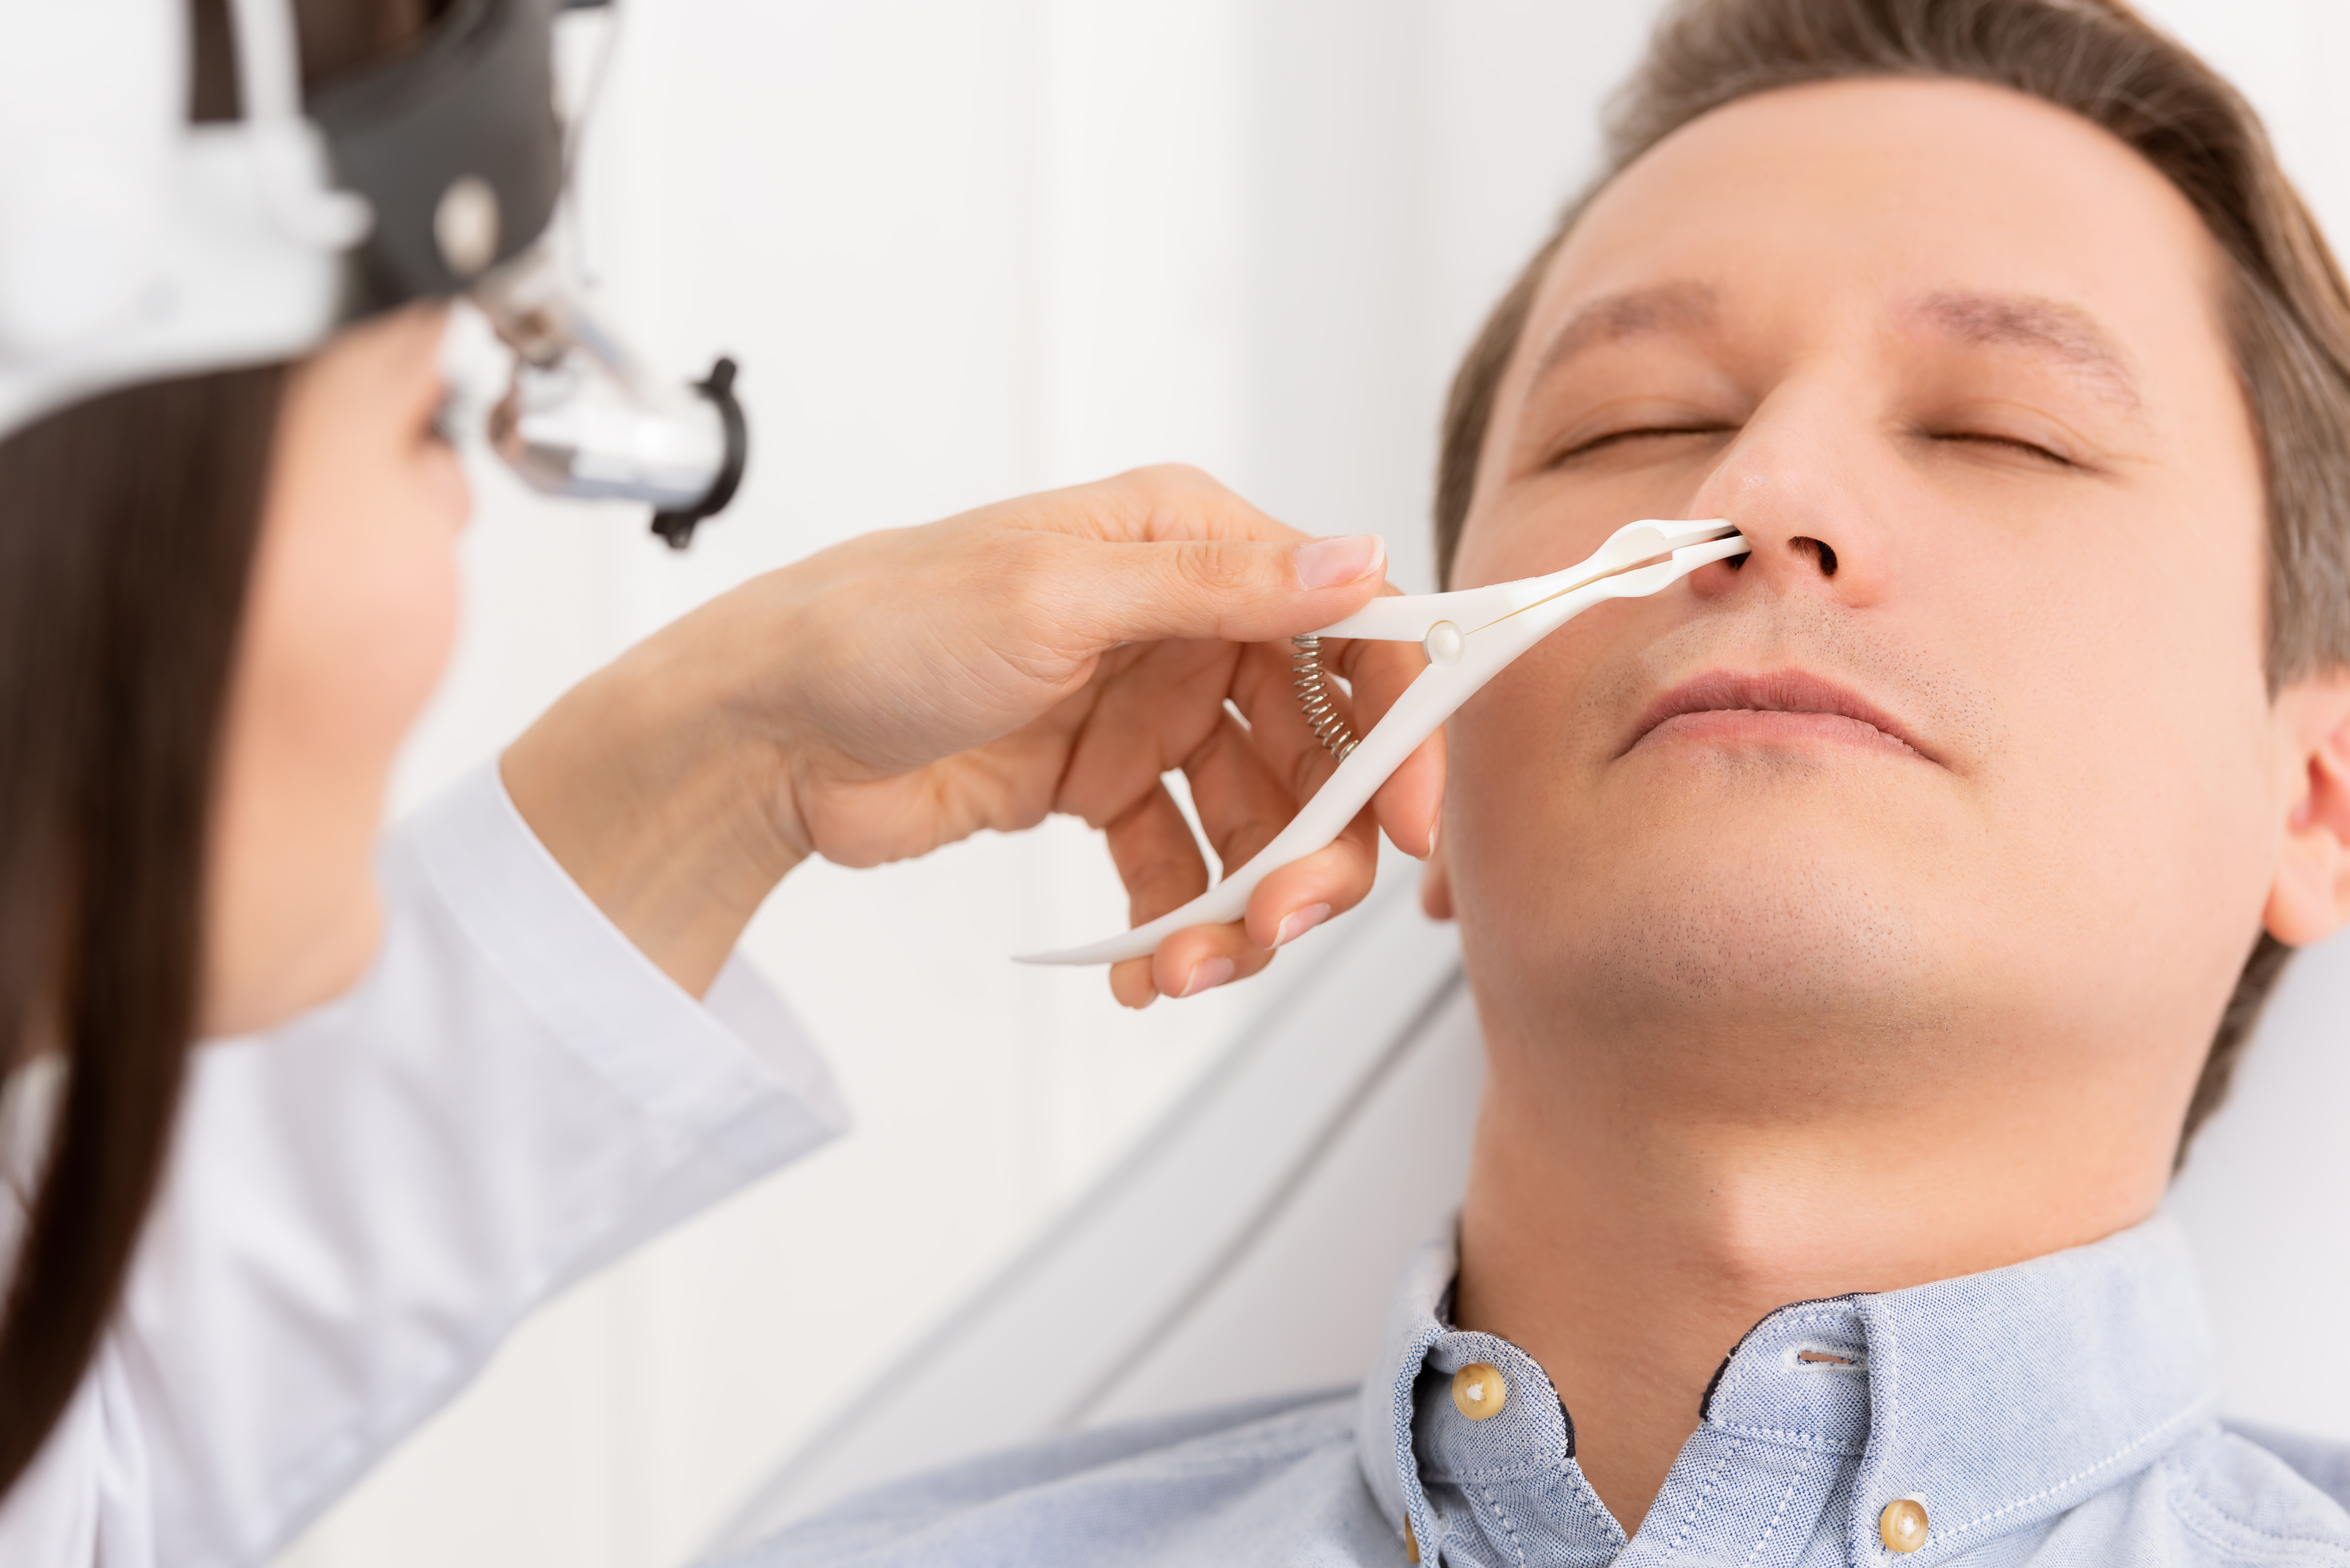 A doctor uses a nasal speculum to see into a reclining man's nostril.